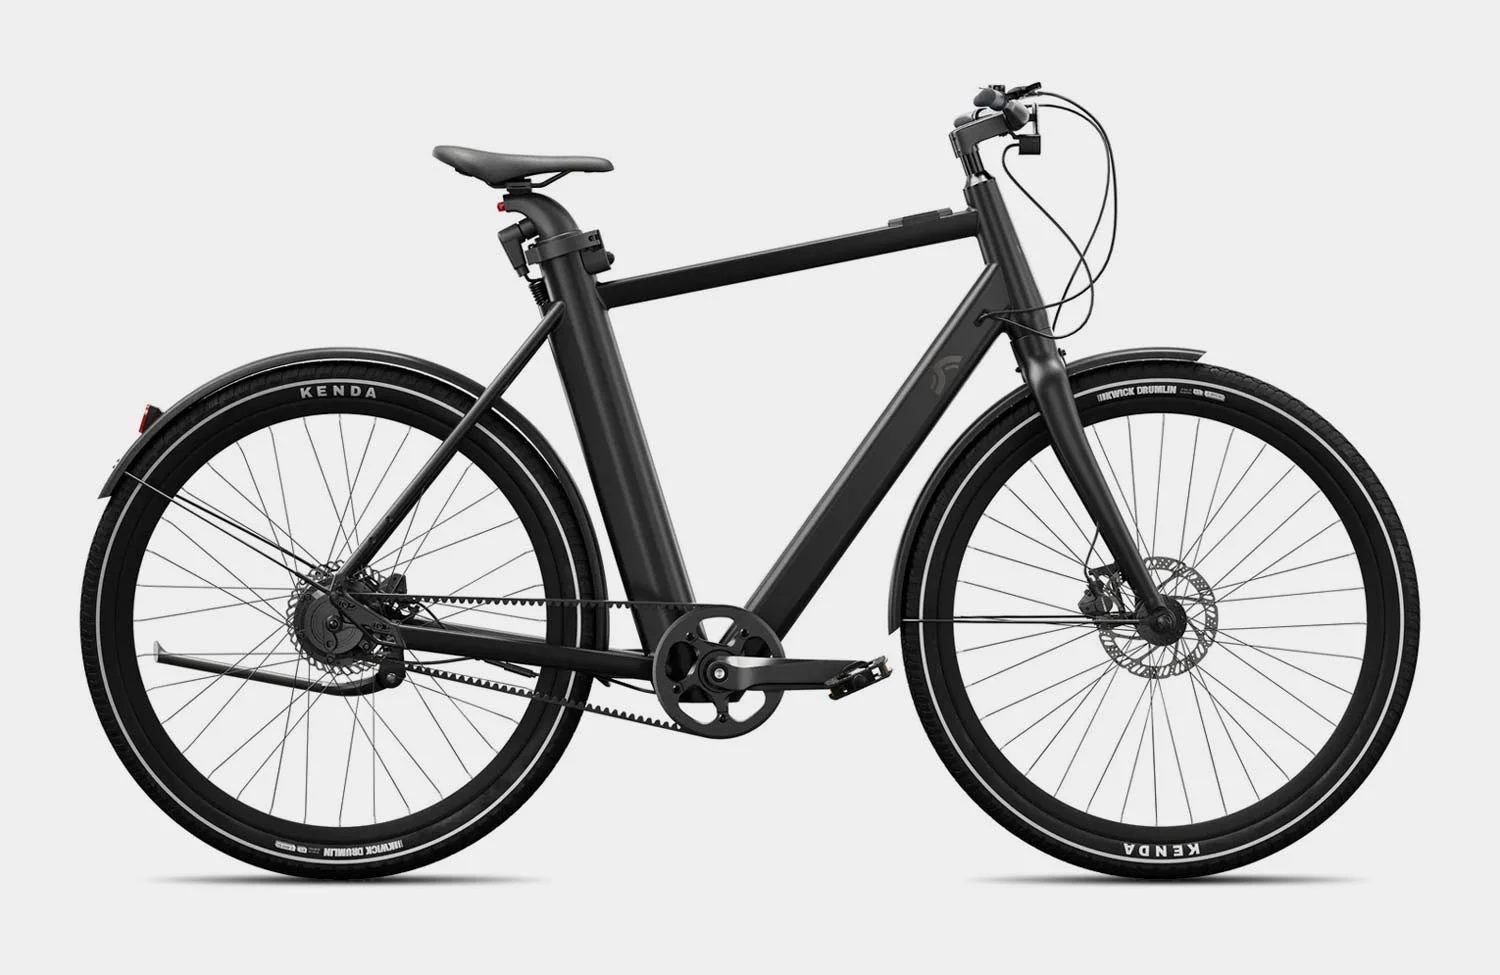 An urban e-bike from we the take new bike discounter: look Crivit from Lidl the at a —